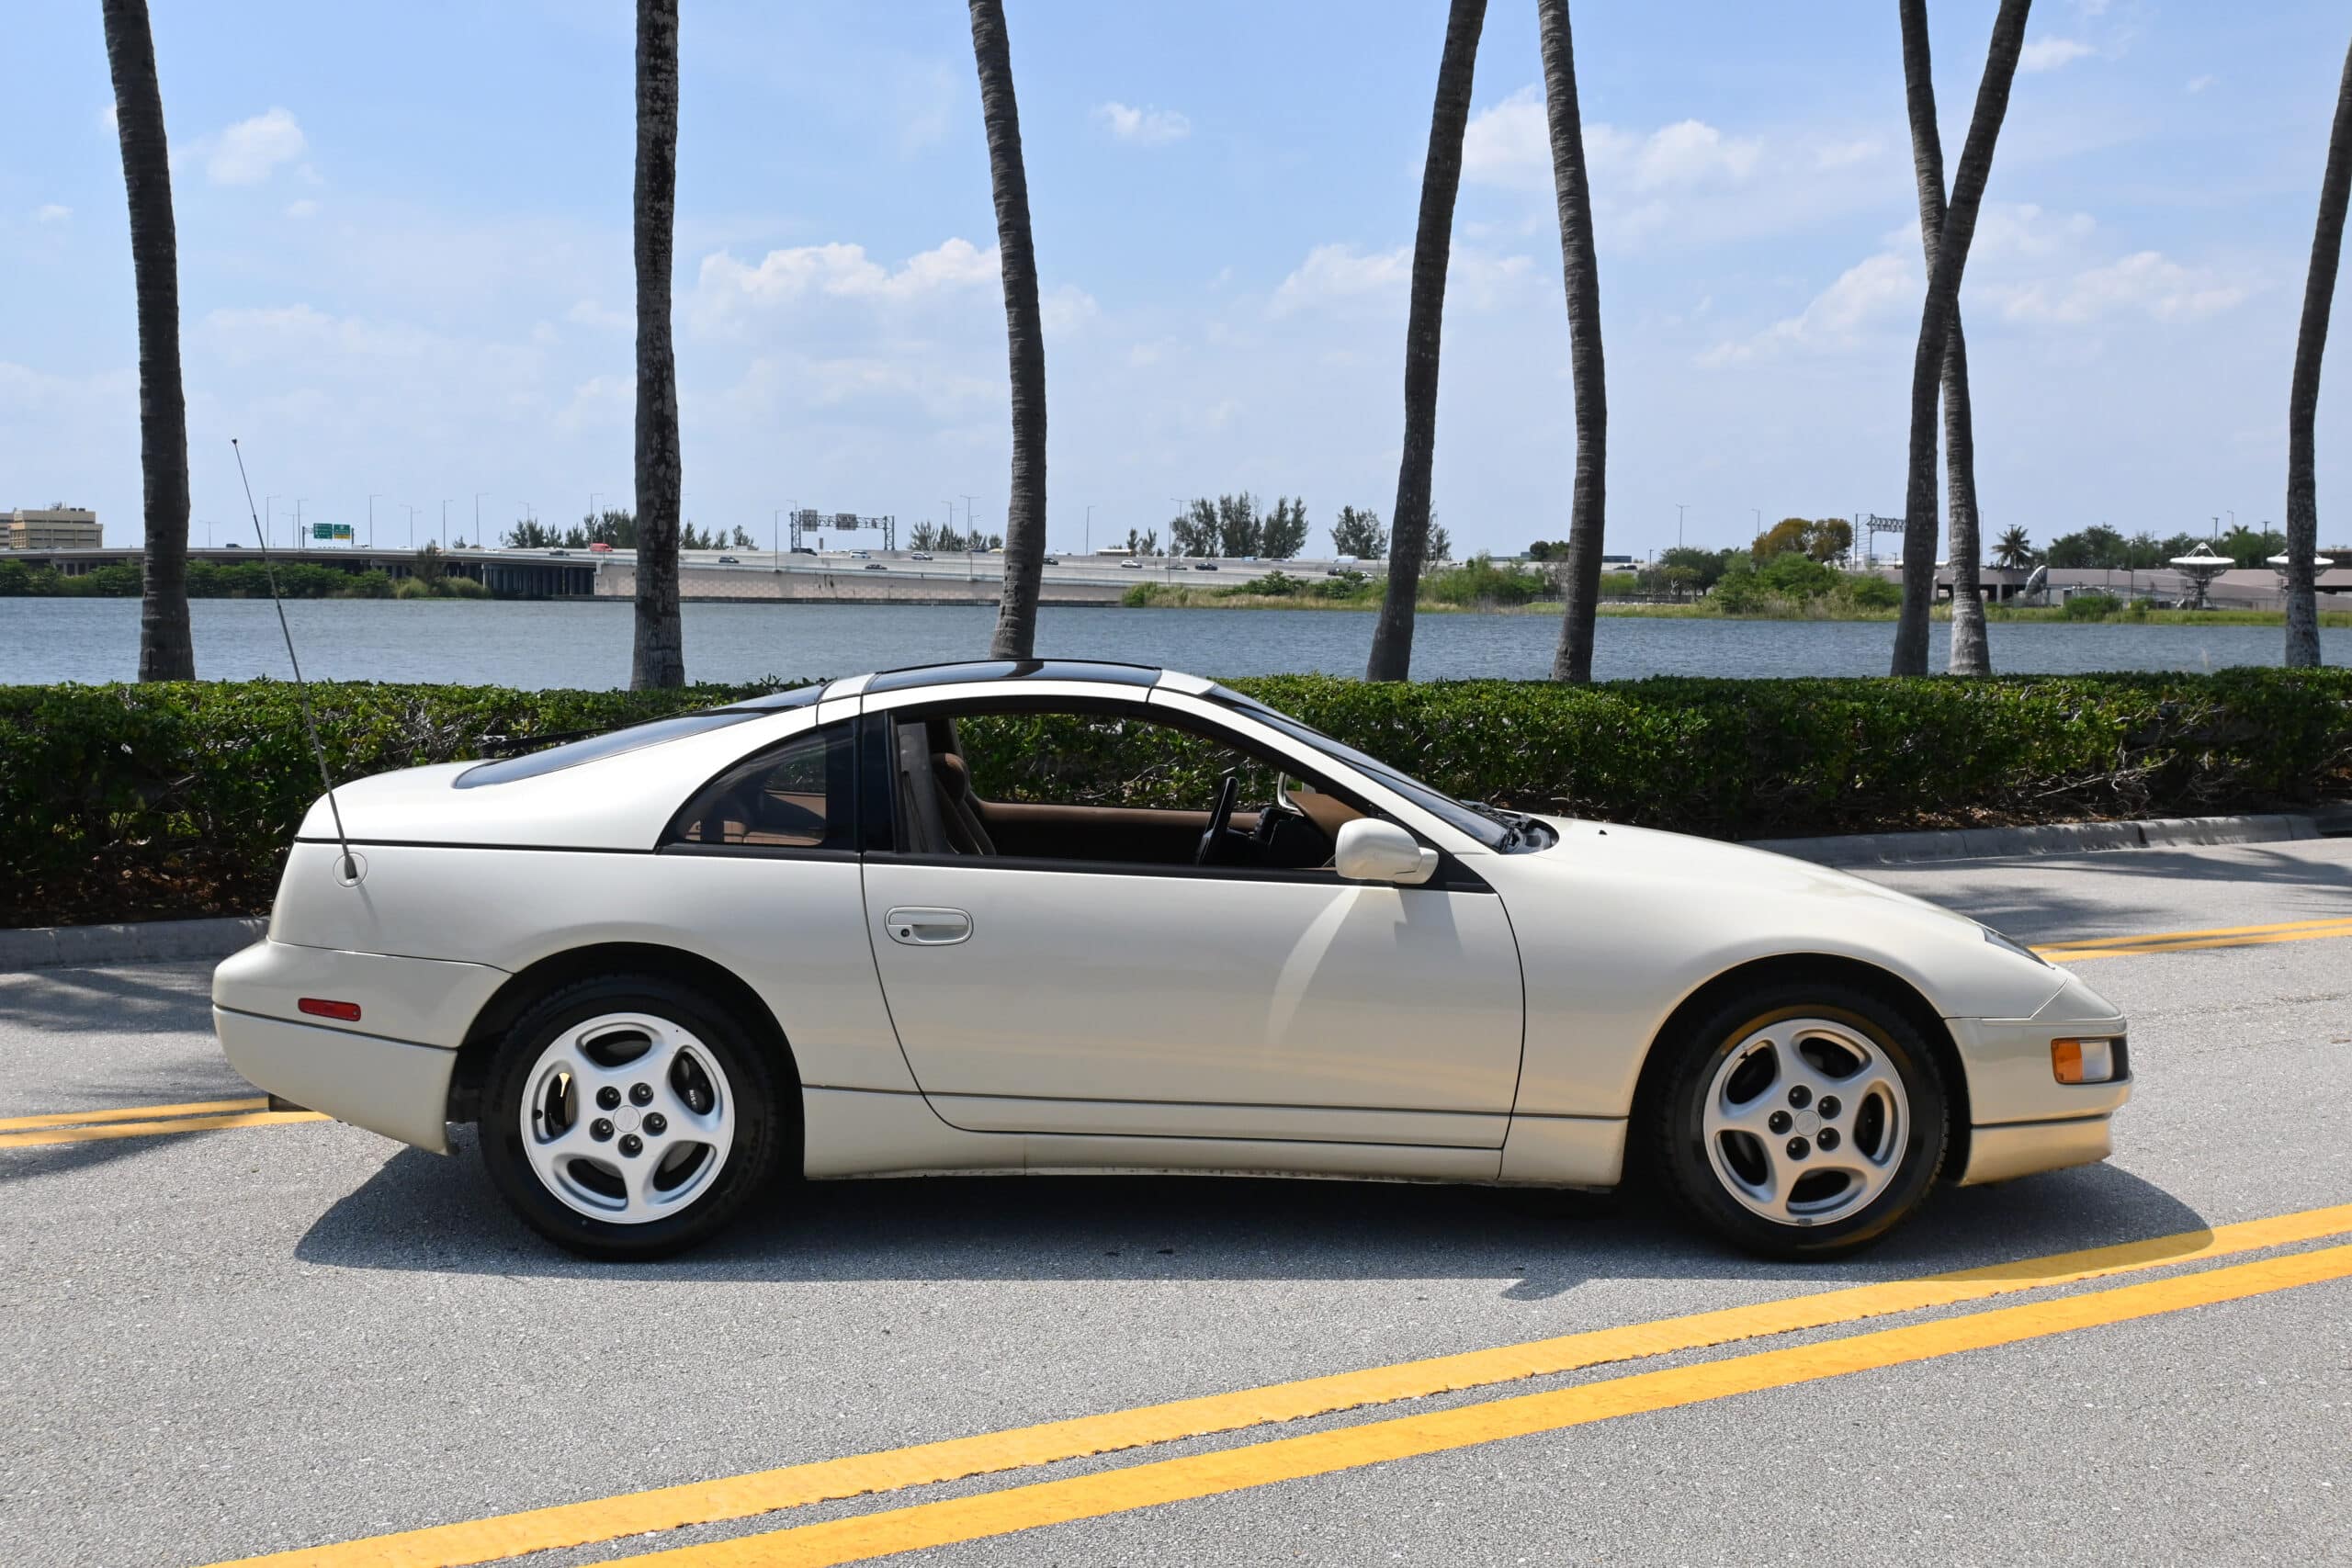 1994 Nissan 300ZX, One owner Garage find! ONLY 50K ACTUAL miles, Rust free Nevada time capsule, Manual Transmission, original Pearl White paint